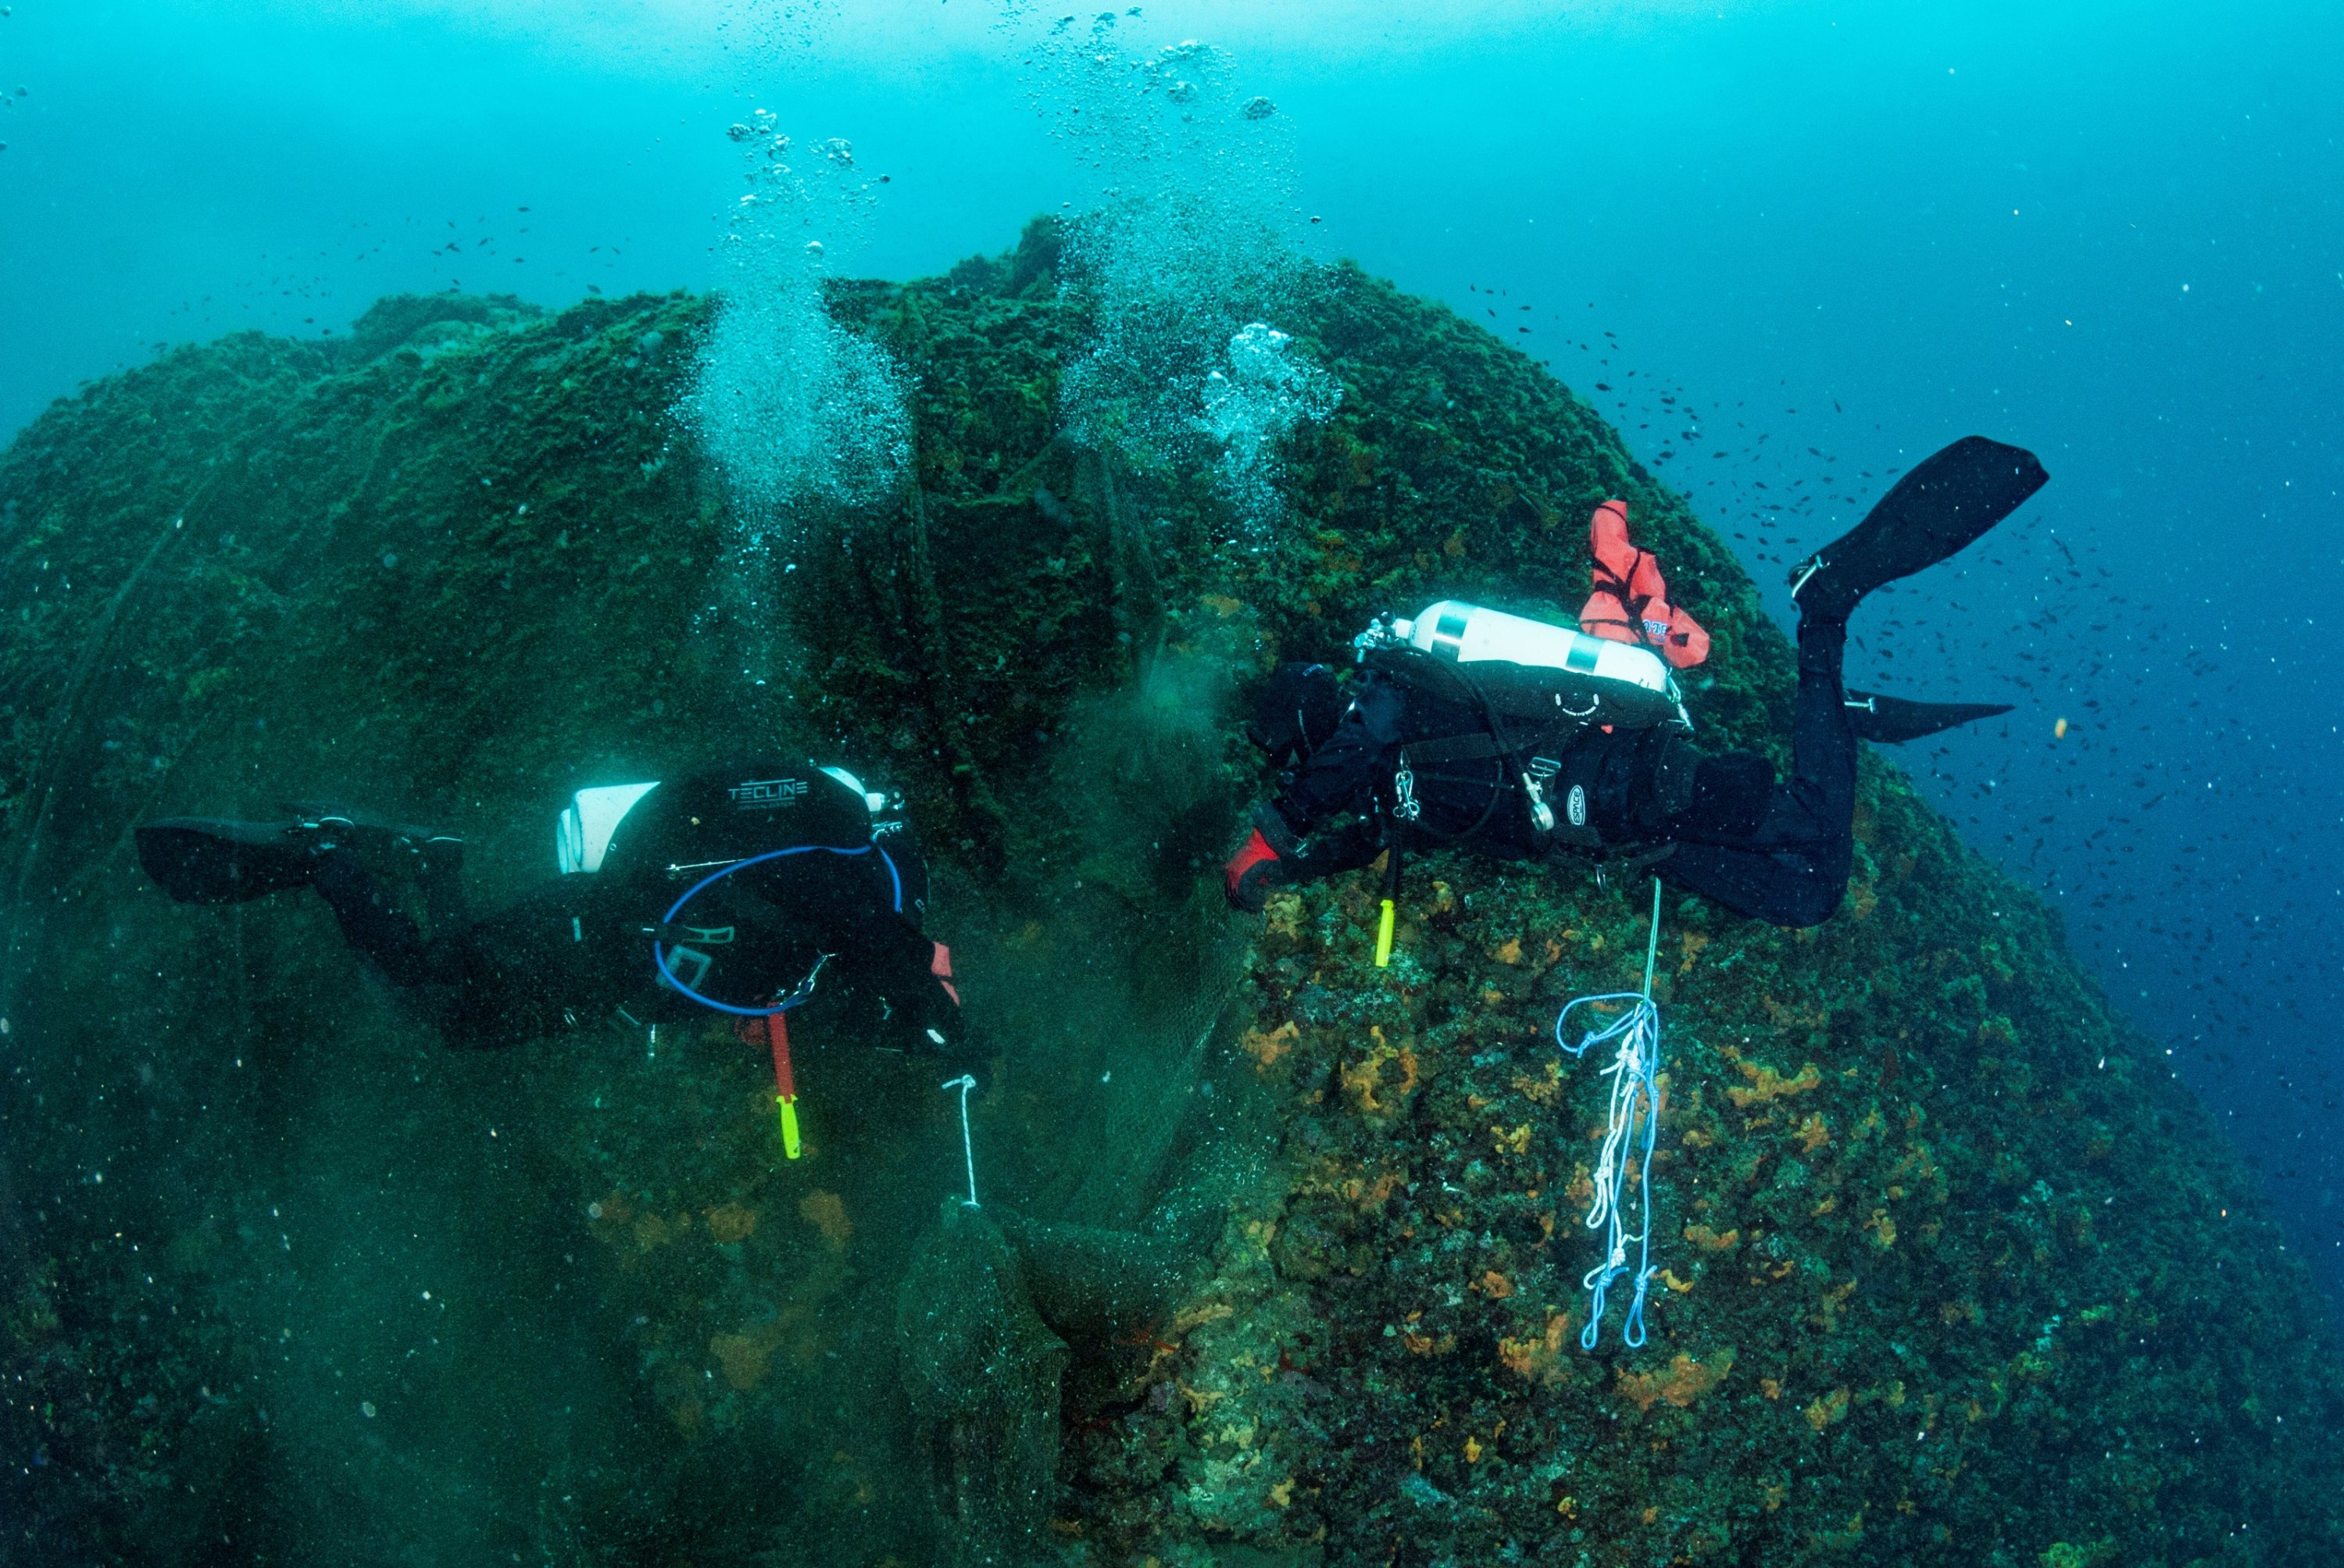 Divers attach a lifting bag to a ghost fishing net on the seabed in the village of Stratoni near Halkidiki, Greece, May 18, 2019. (Areti Kominou/Ghost Fishing Greece/Handout via REUTERS)